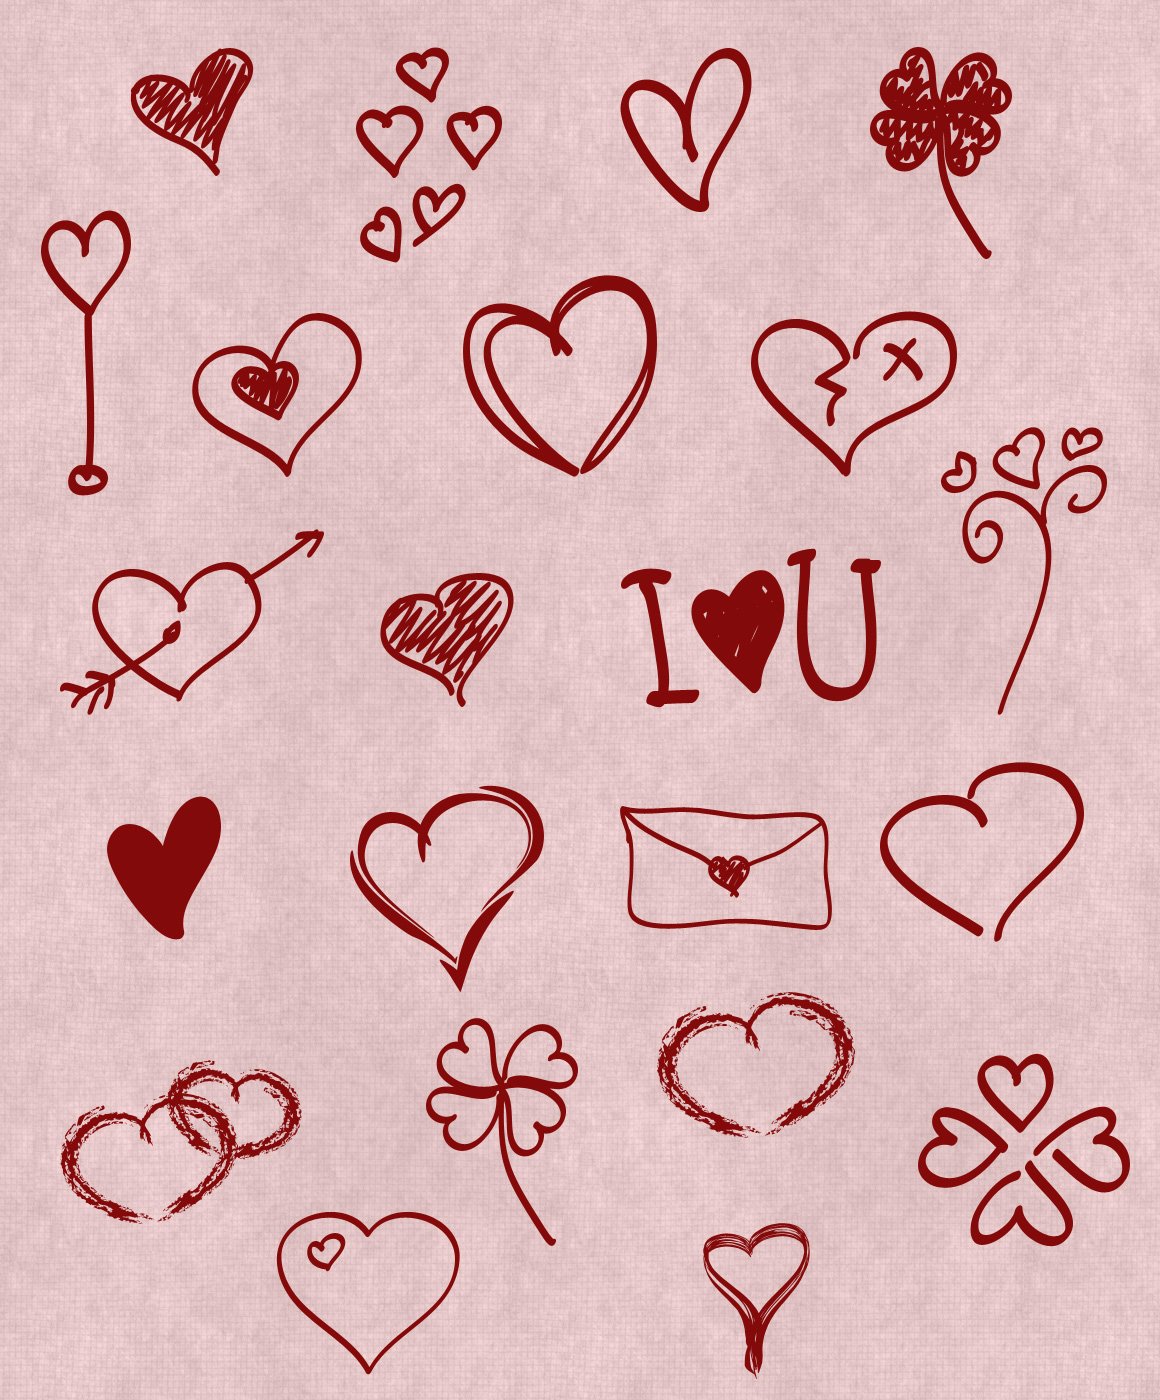 Hand Drawn Heart Shapespreview image.